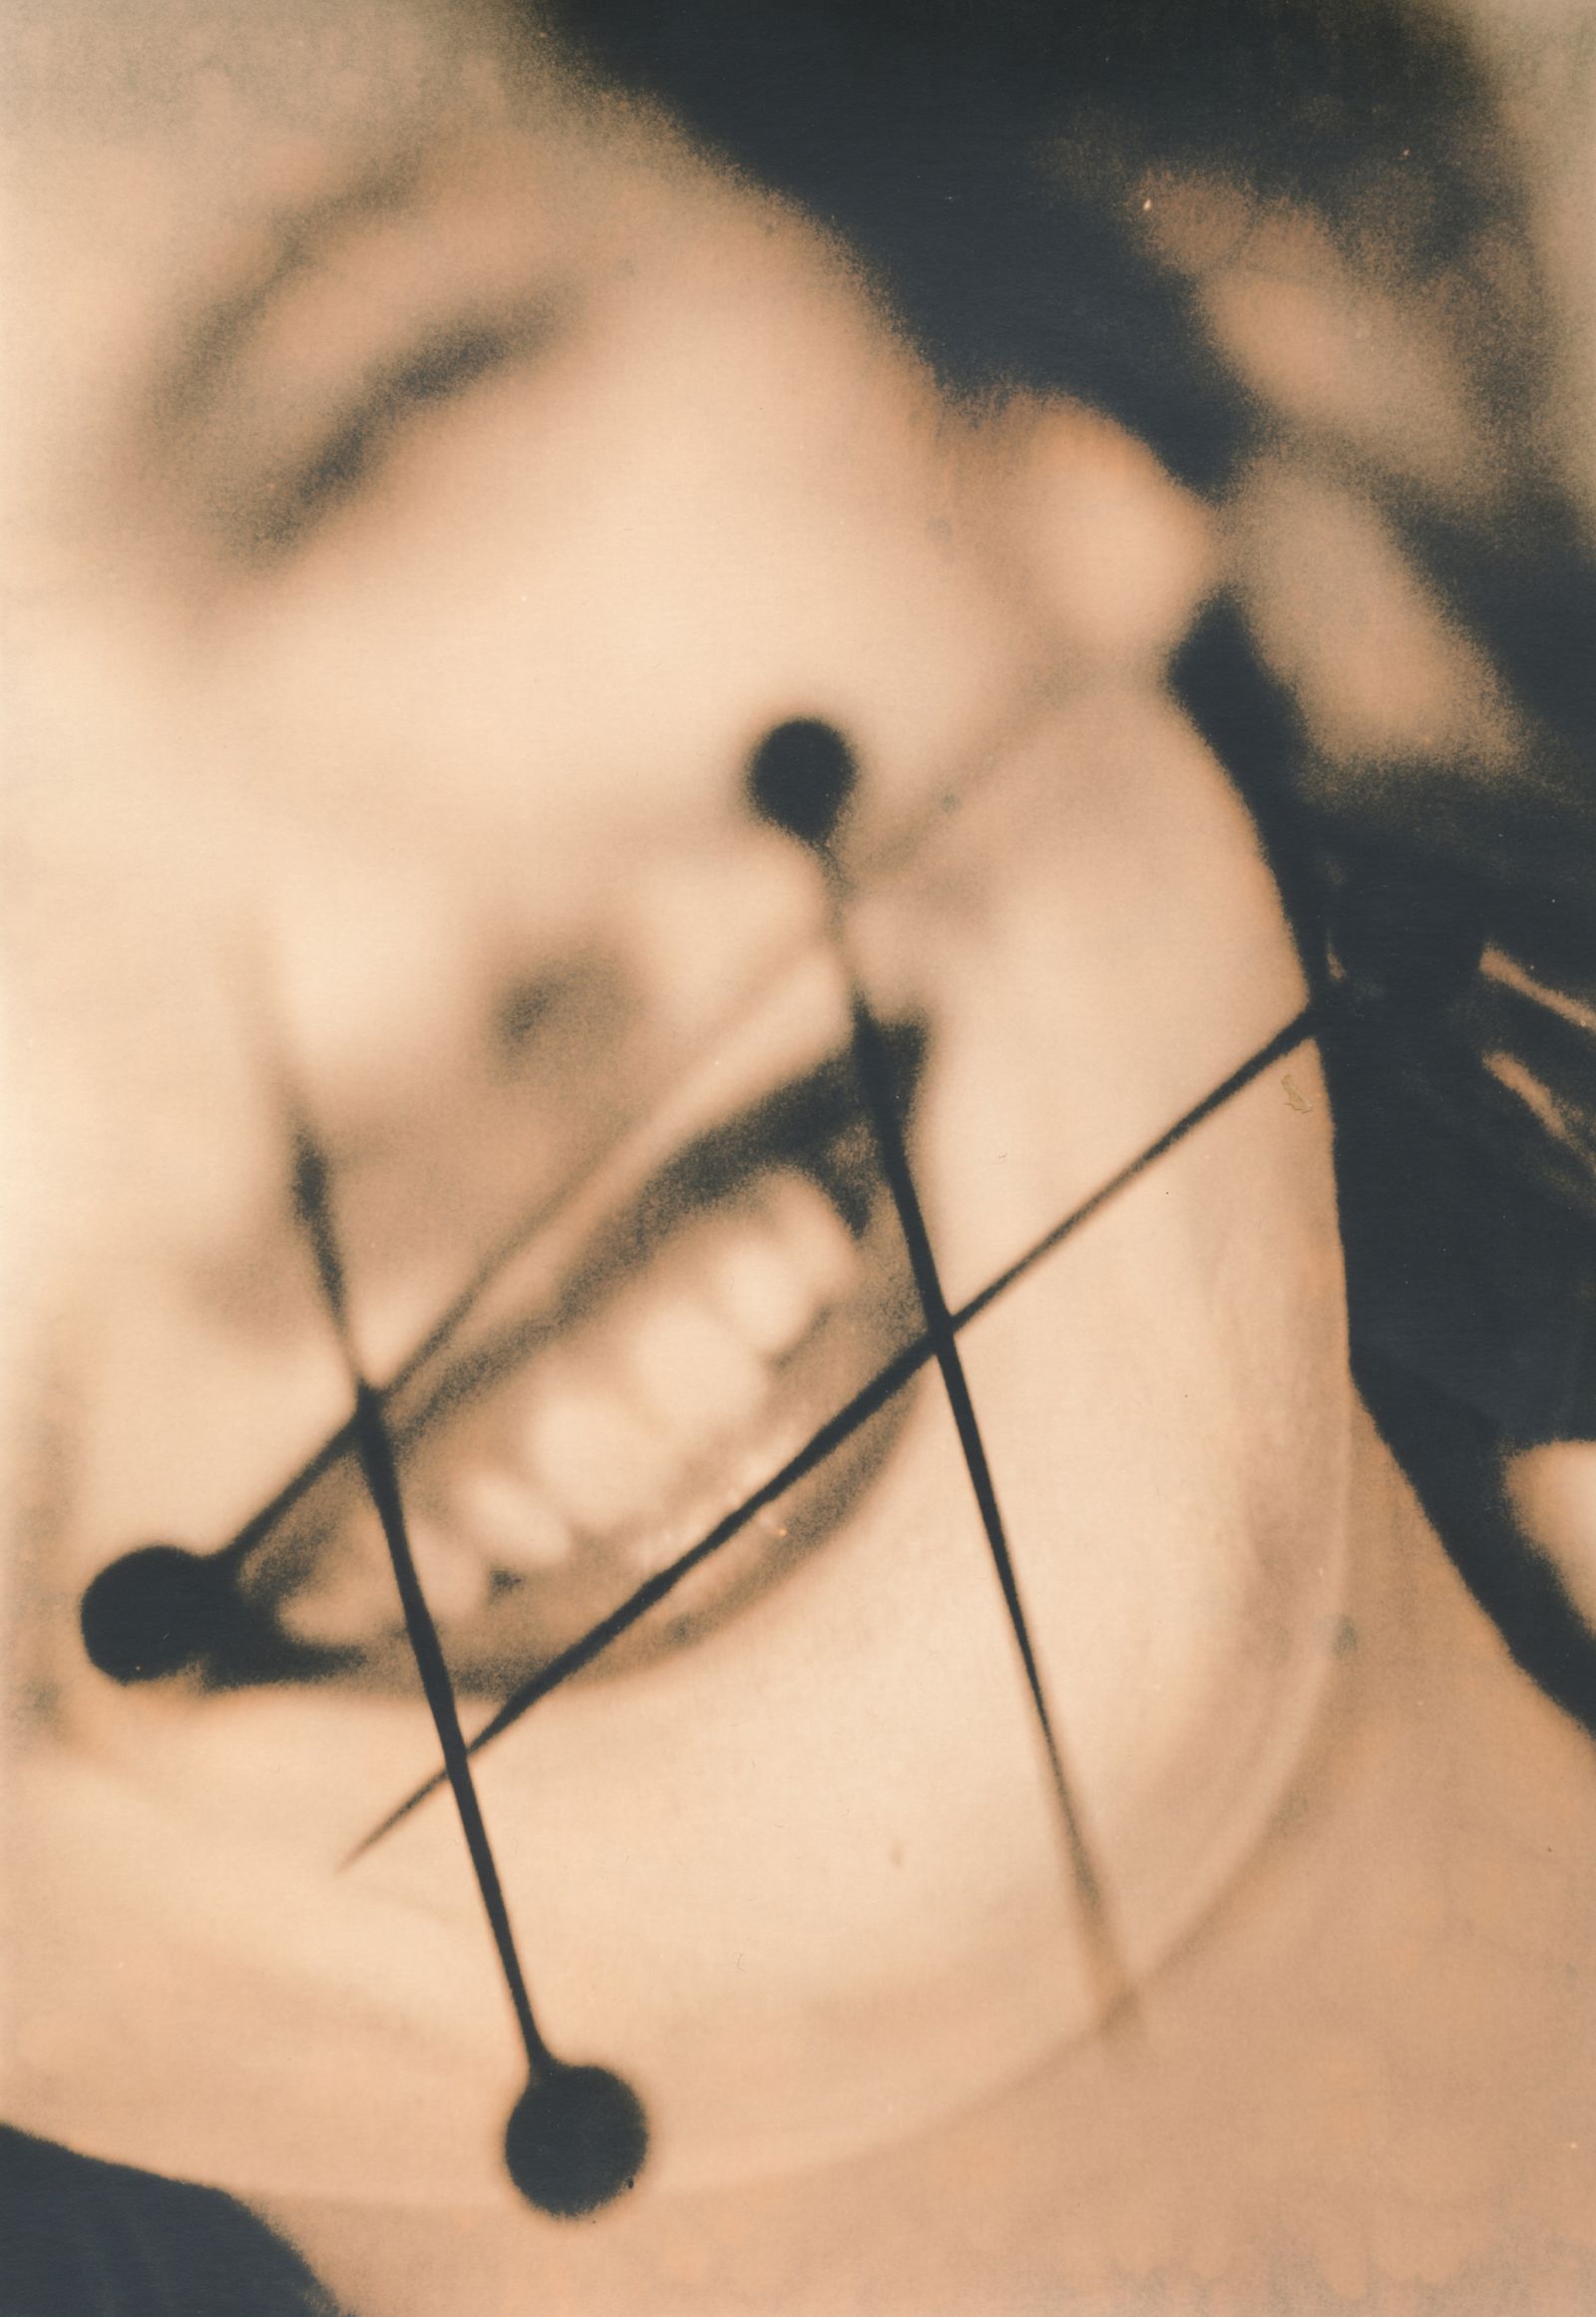 © Jo Stapleton - Mouth with pins. Found 1940s negative rephotographed on a light box with objects added (Lith print)